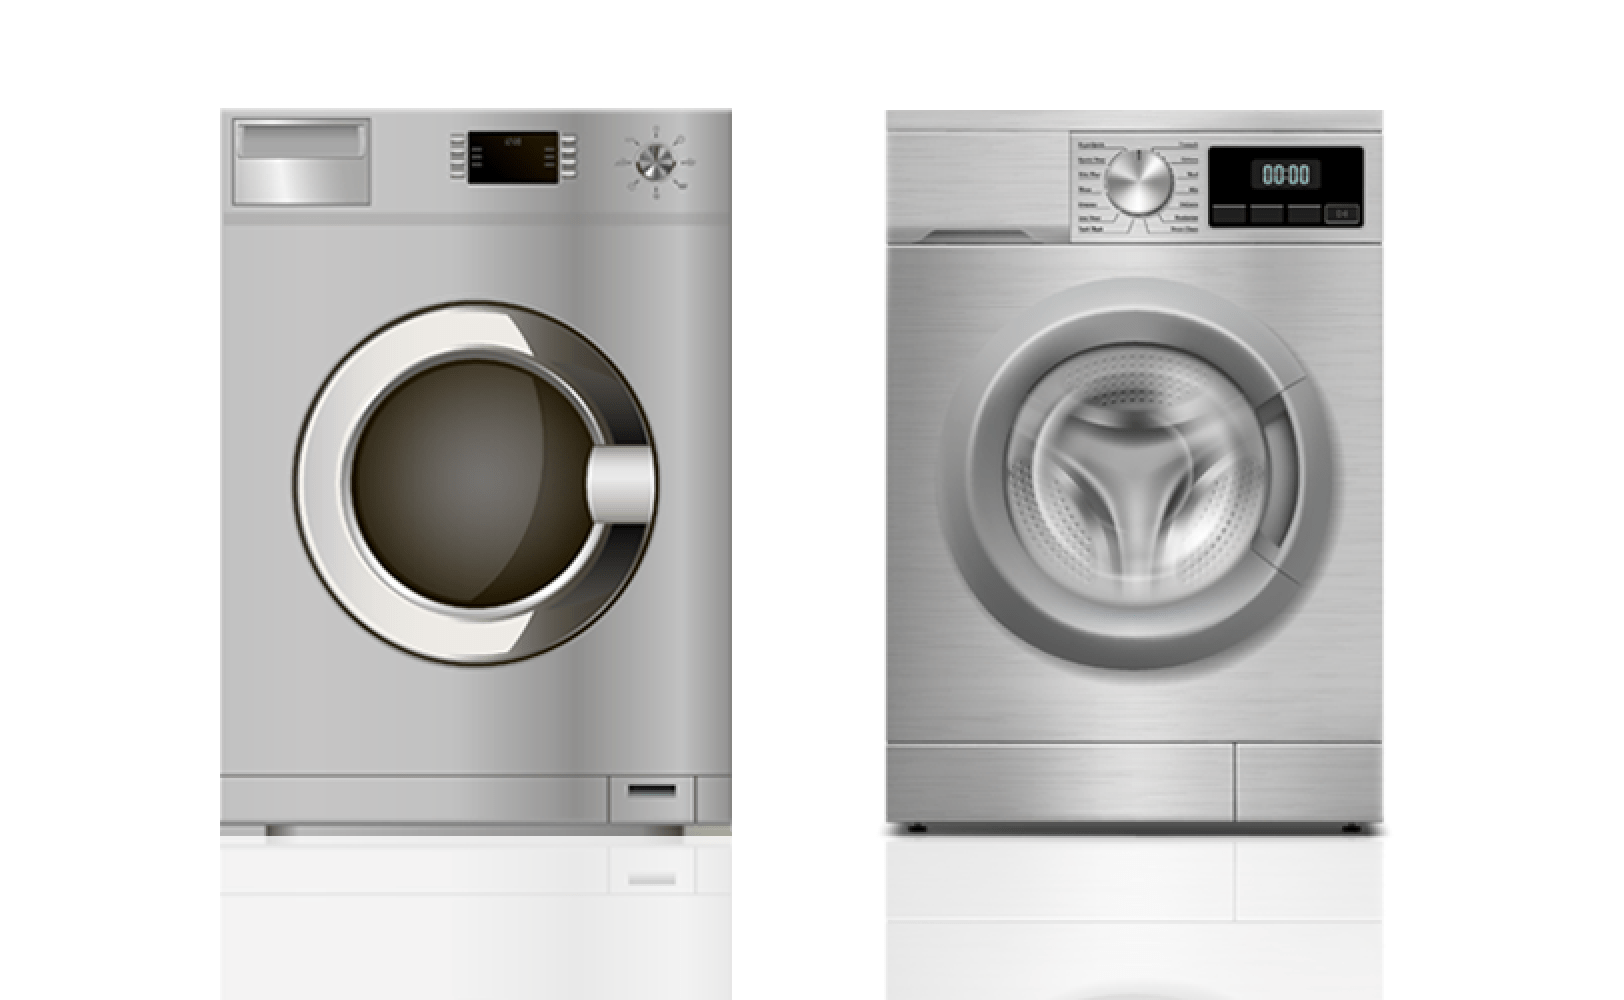 Washer Repair Service in Shirley